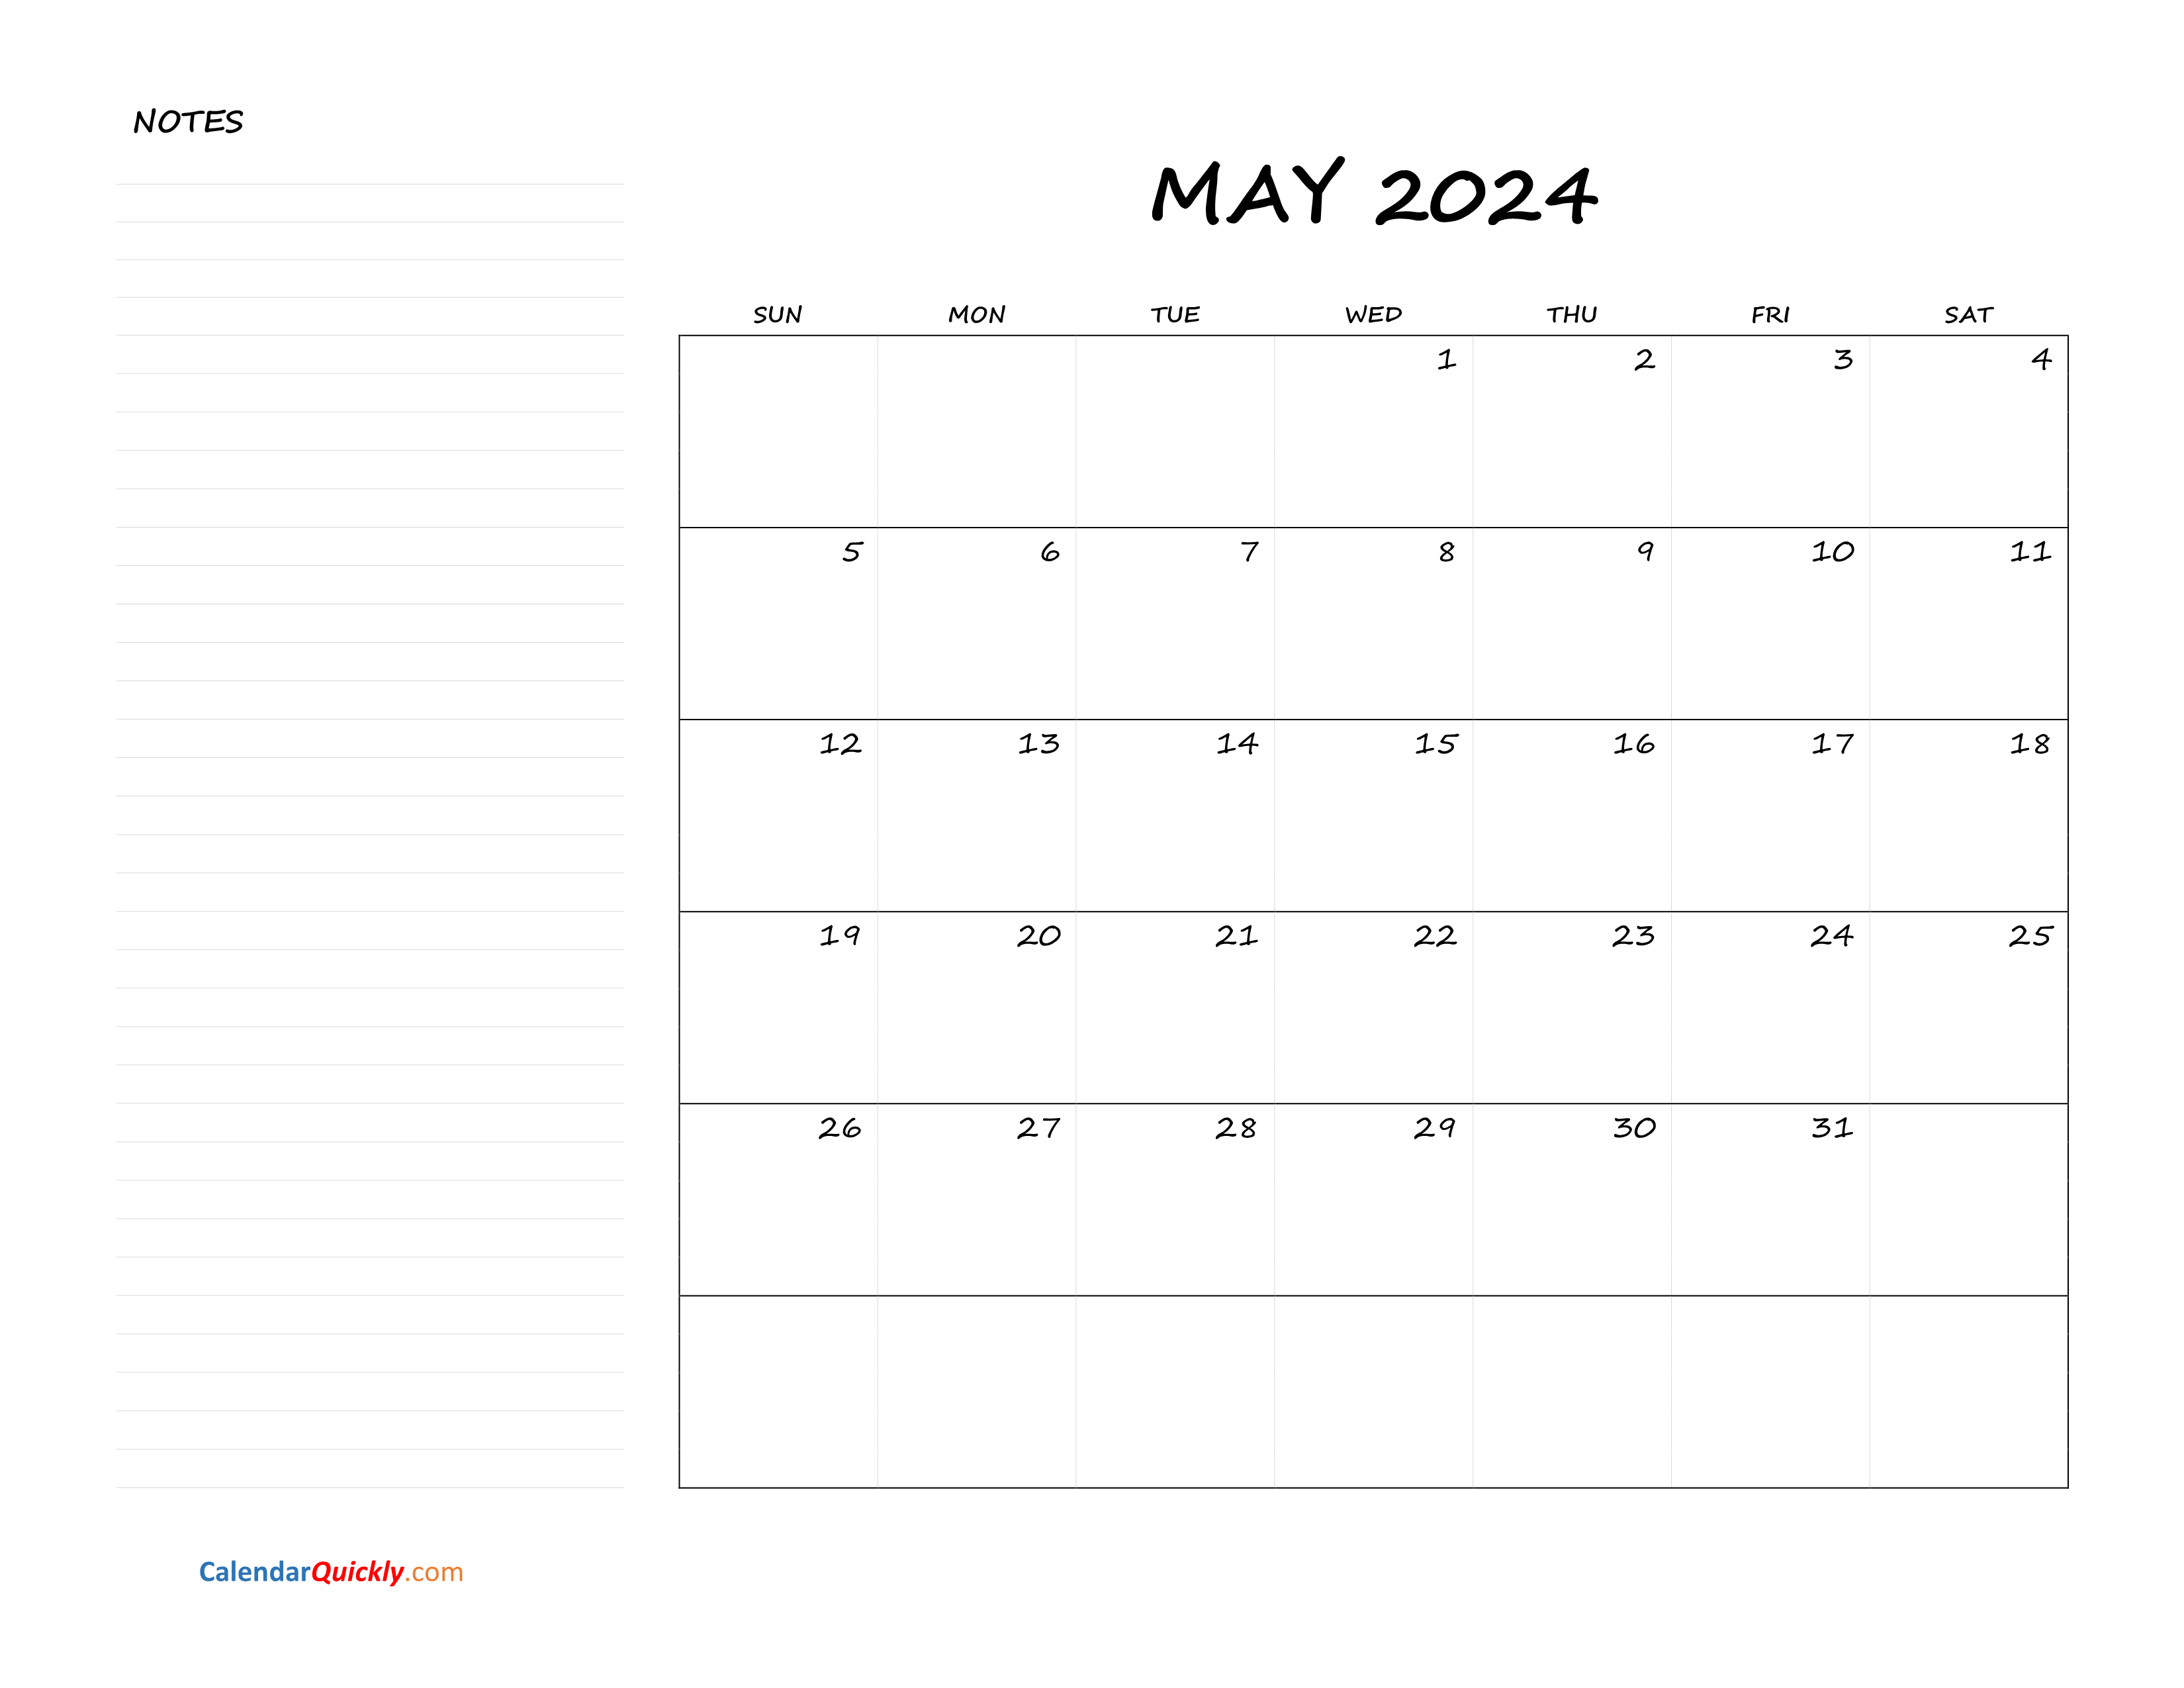 May Blank Calendar 2024 with Notes Calendar Quickly